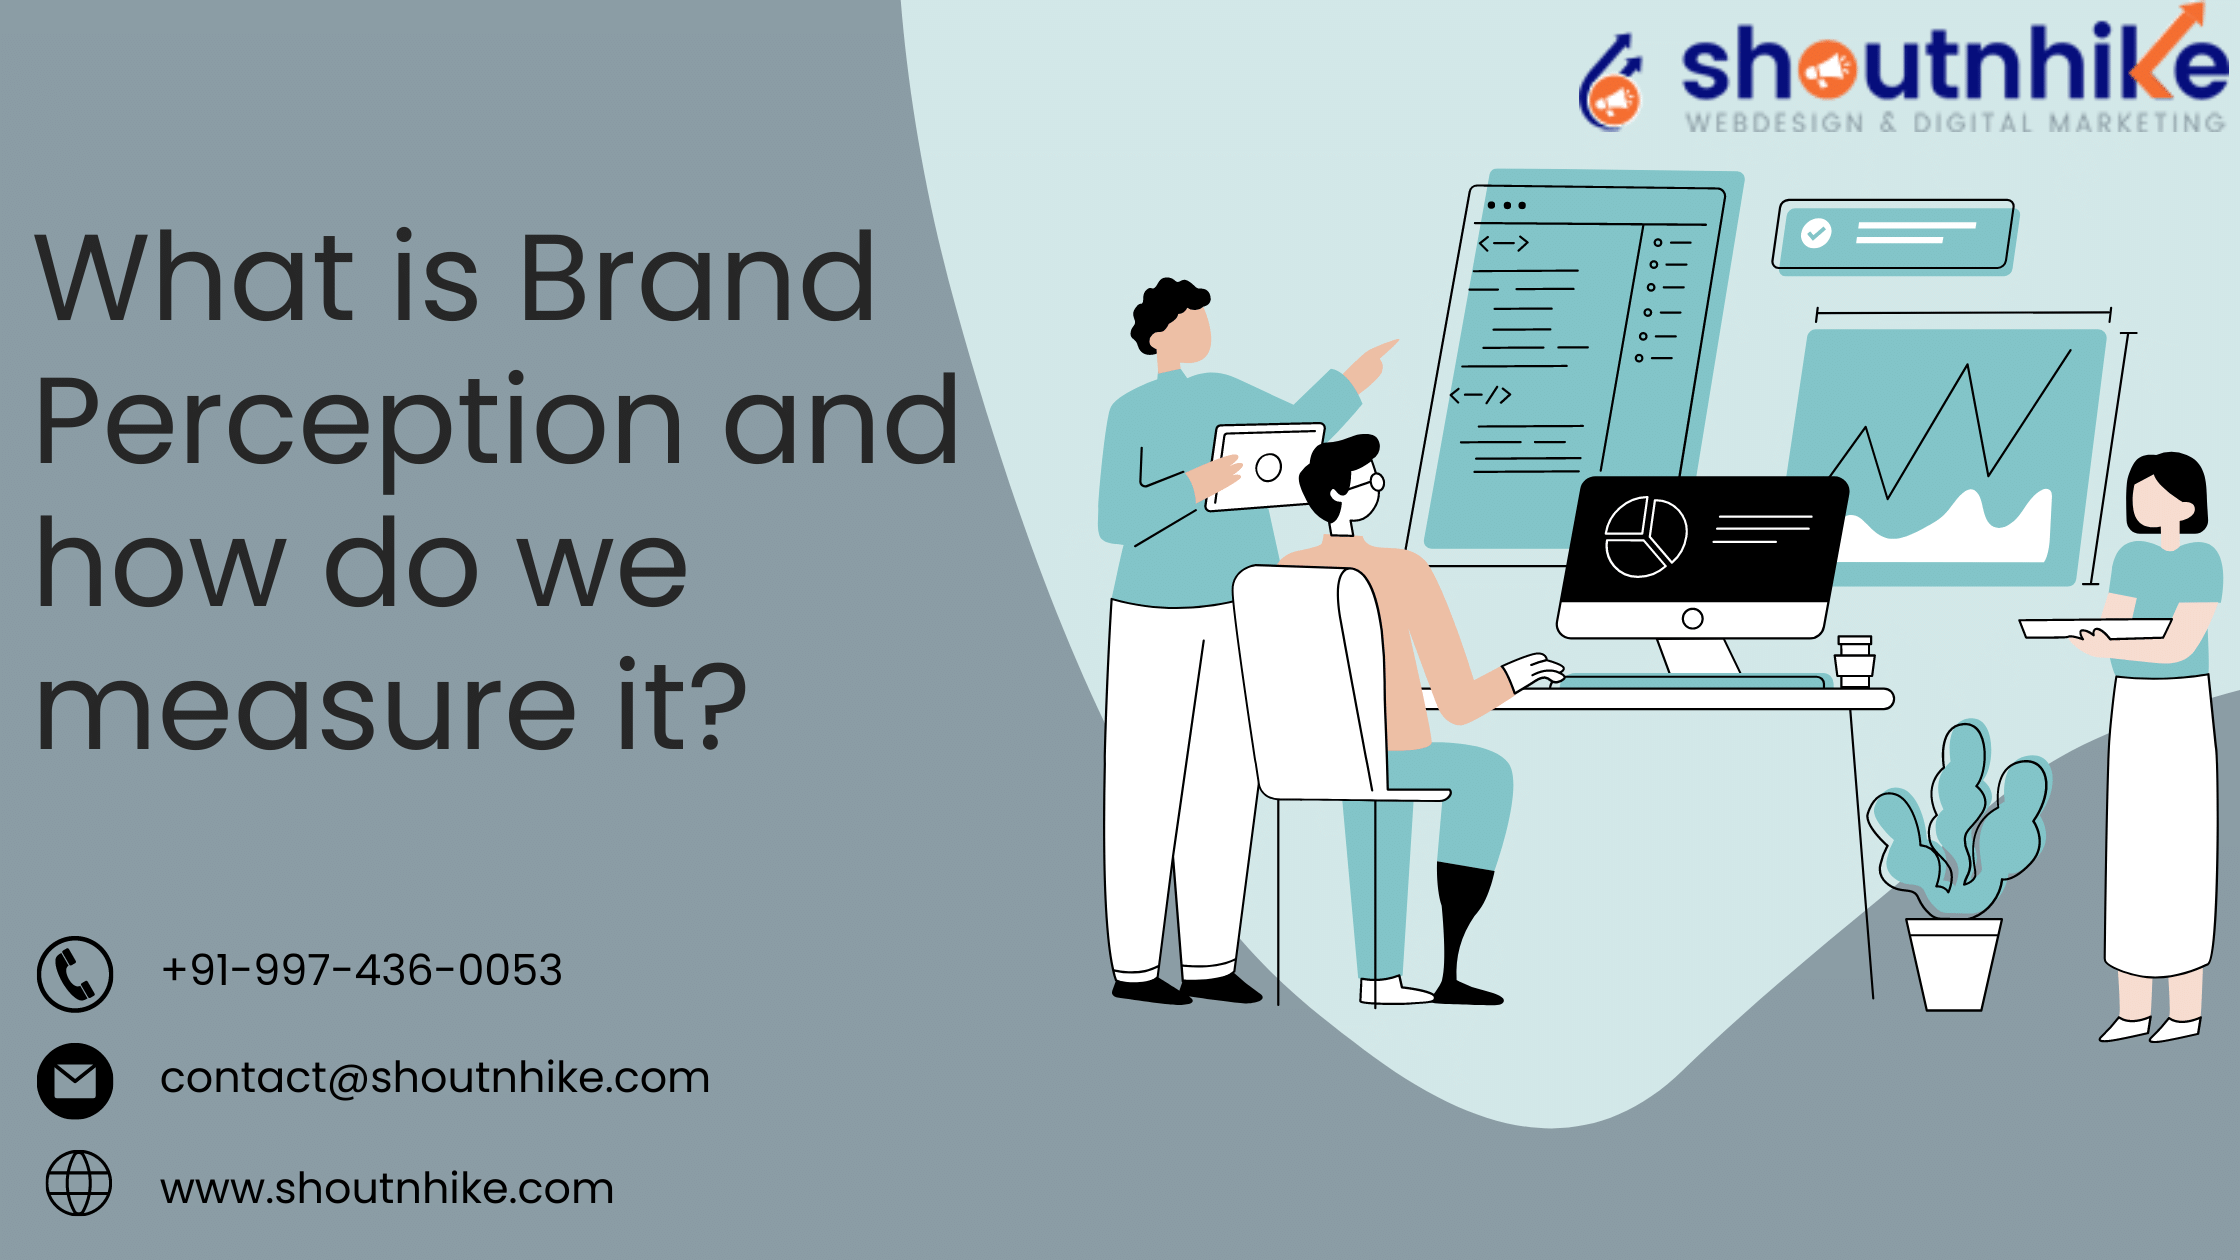 What is Brand Perception and how do we measure it?